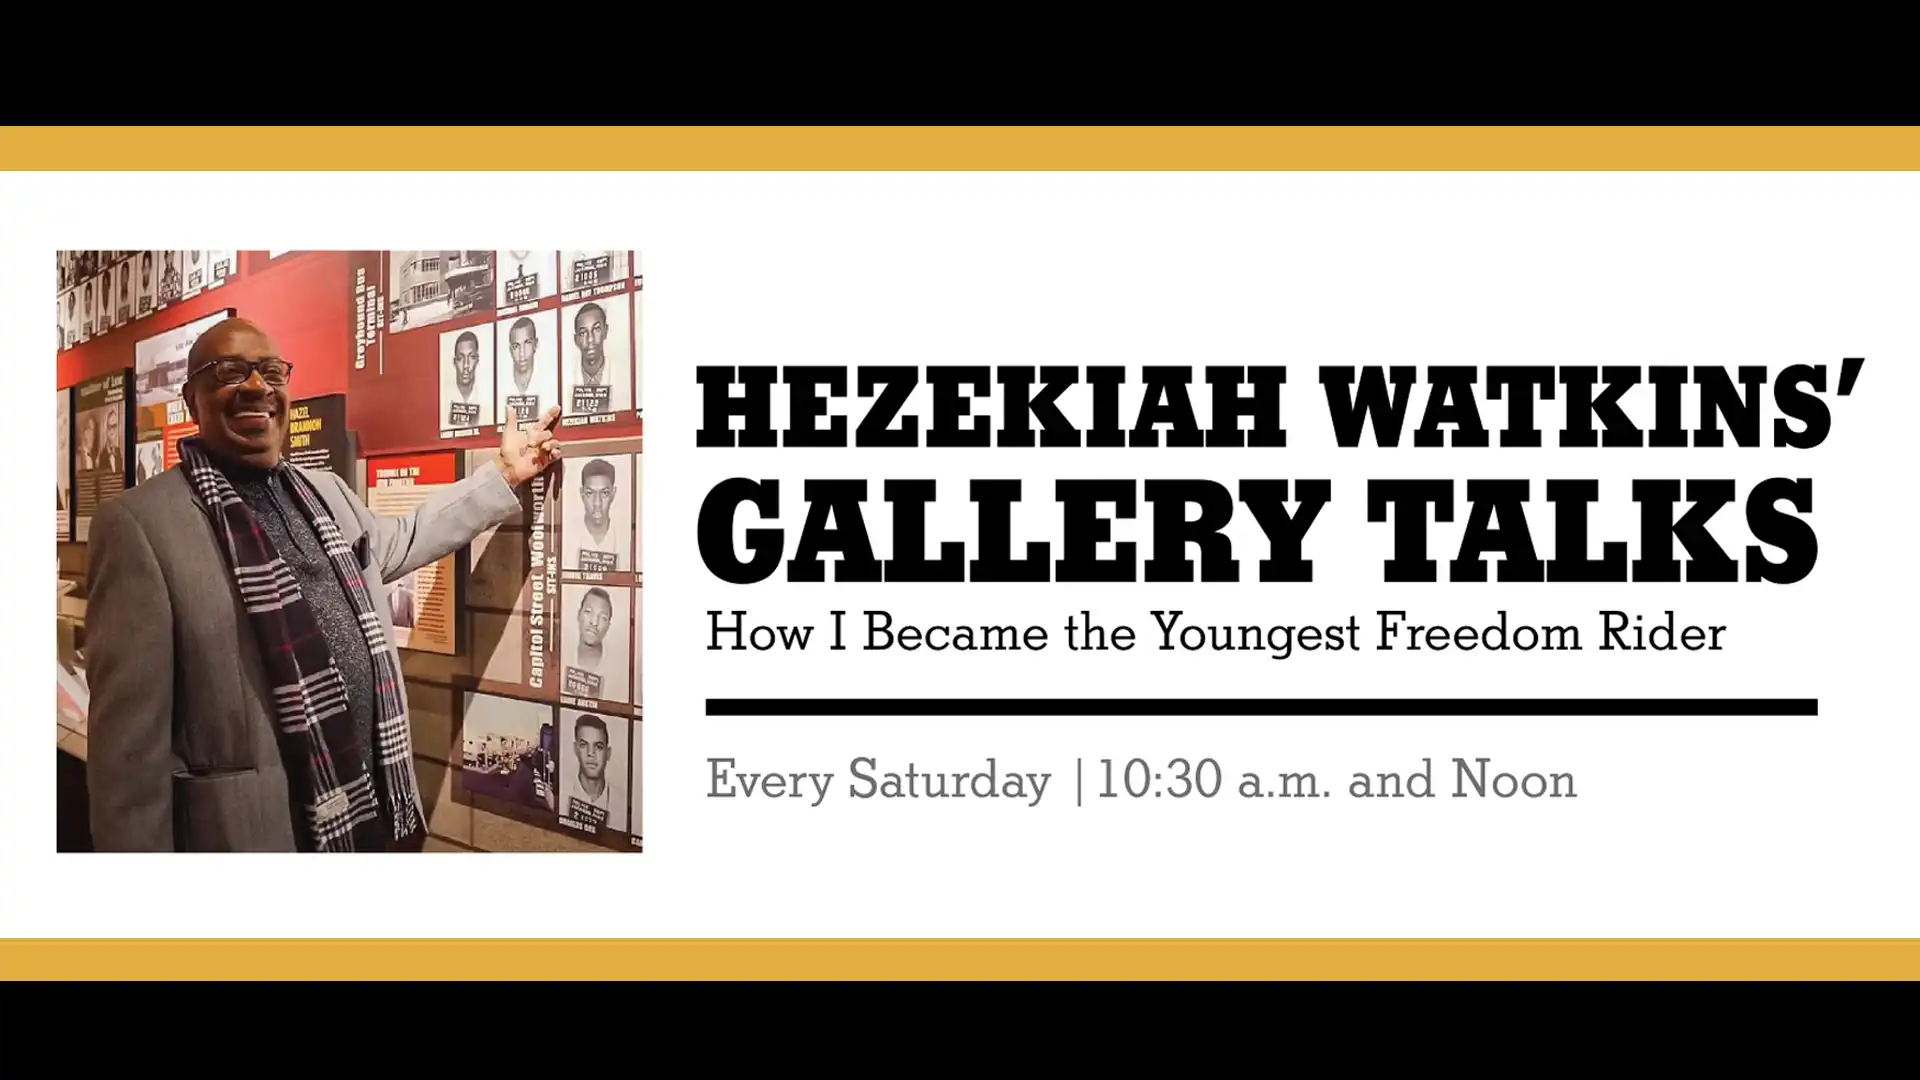 Hezekiah Watkins' Gallery Talk - Every Saturday 10:30 am and Noon - Mississippi Civil Rights Museum